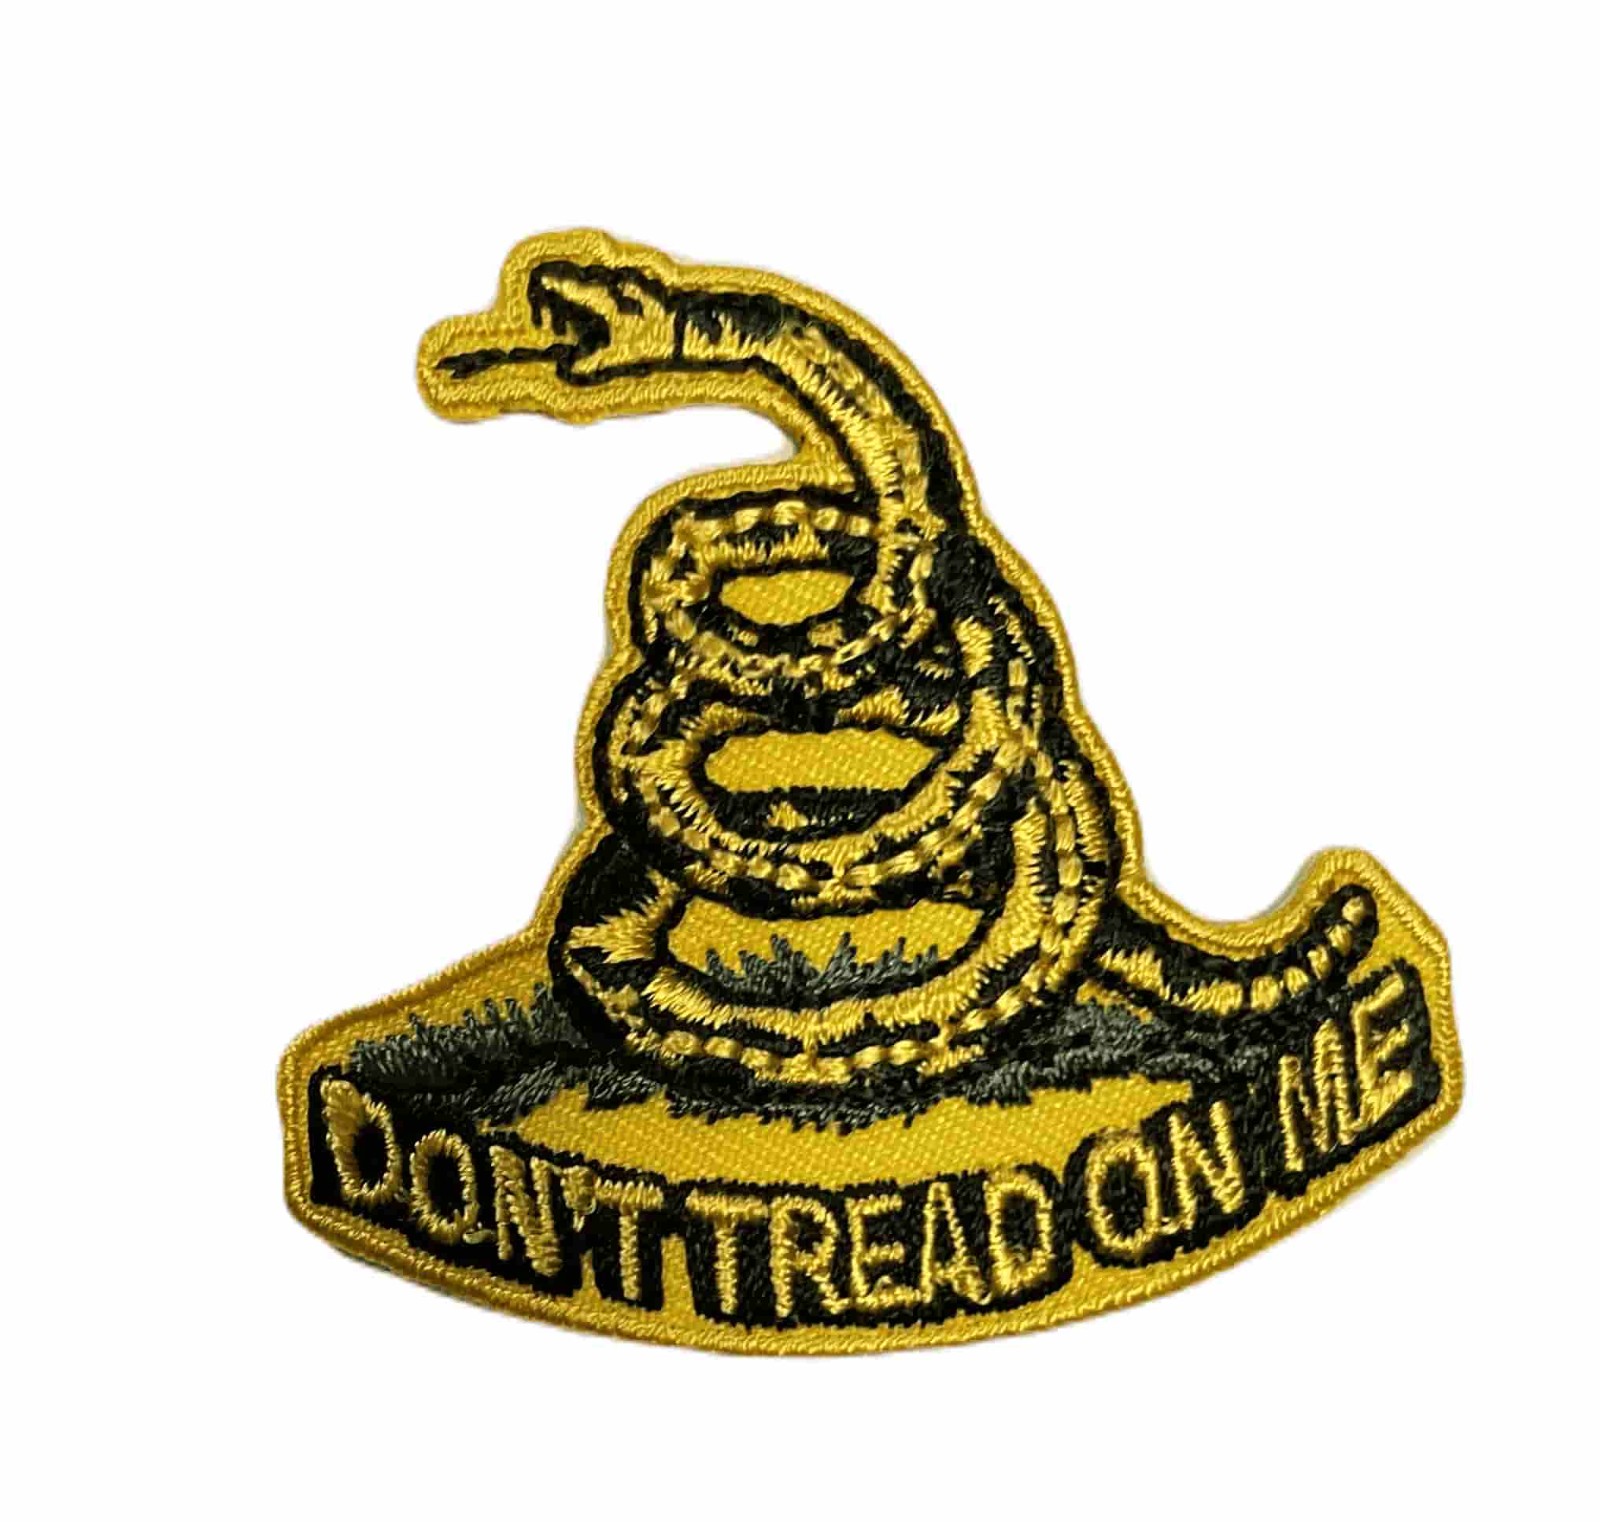 Embroidered Patch with laser cut edge